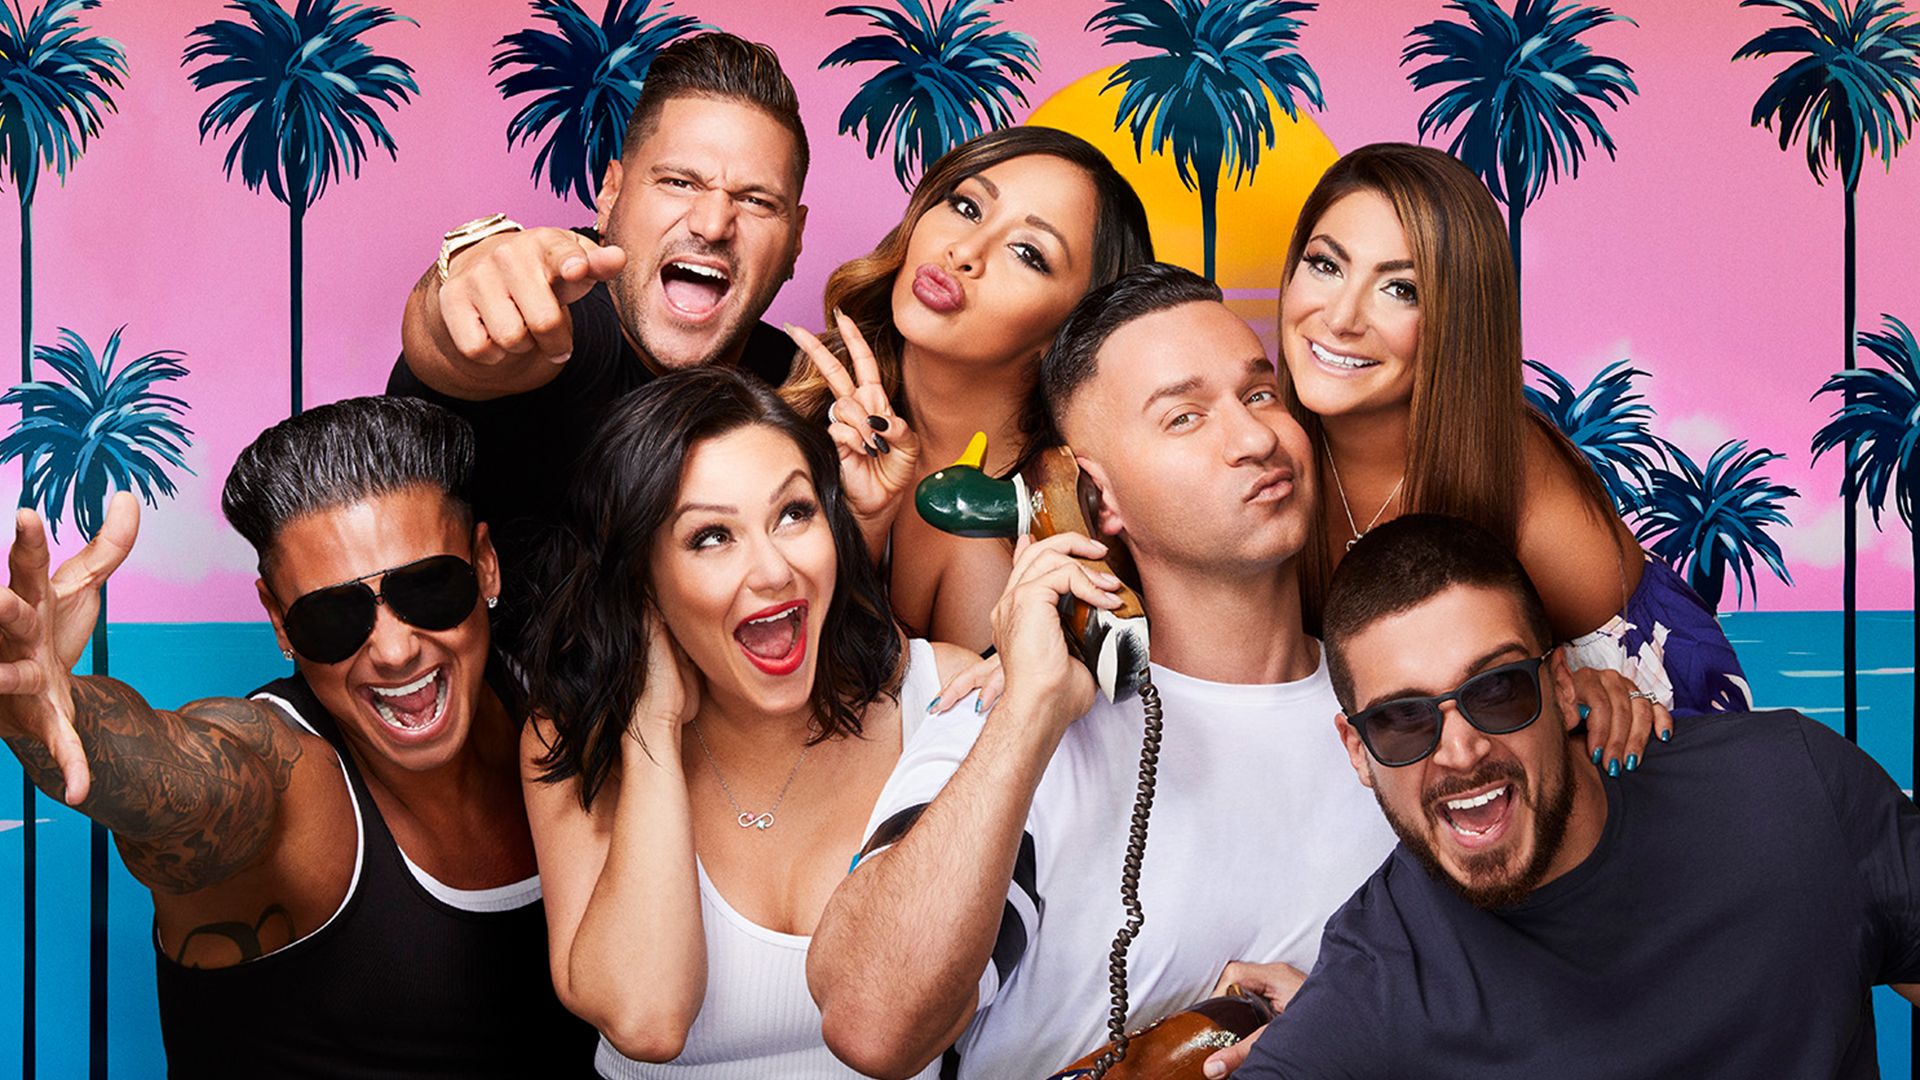 Jersey Shore: Family Vacation TV Show Cancelled